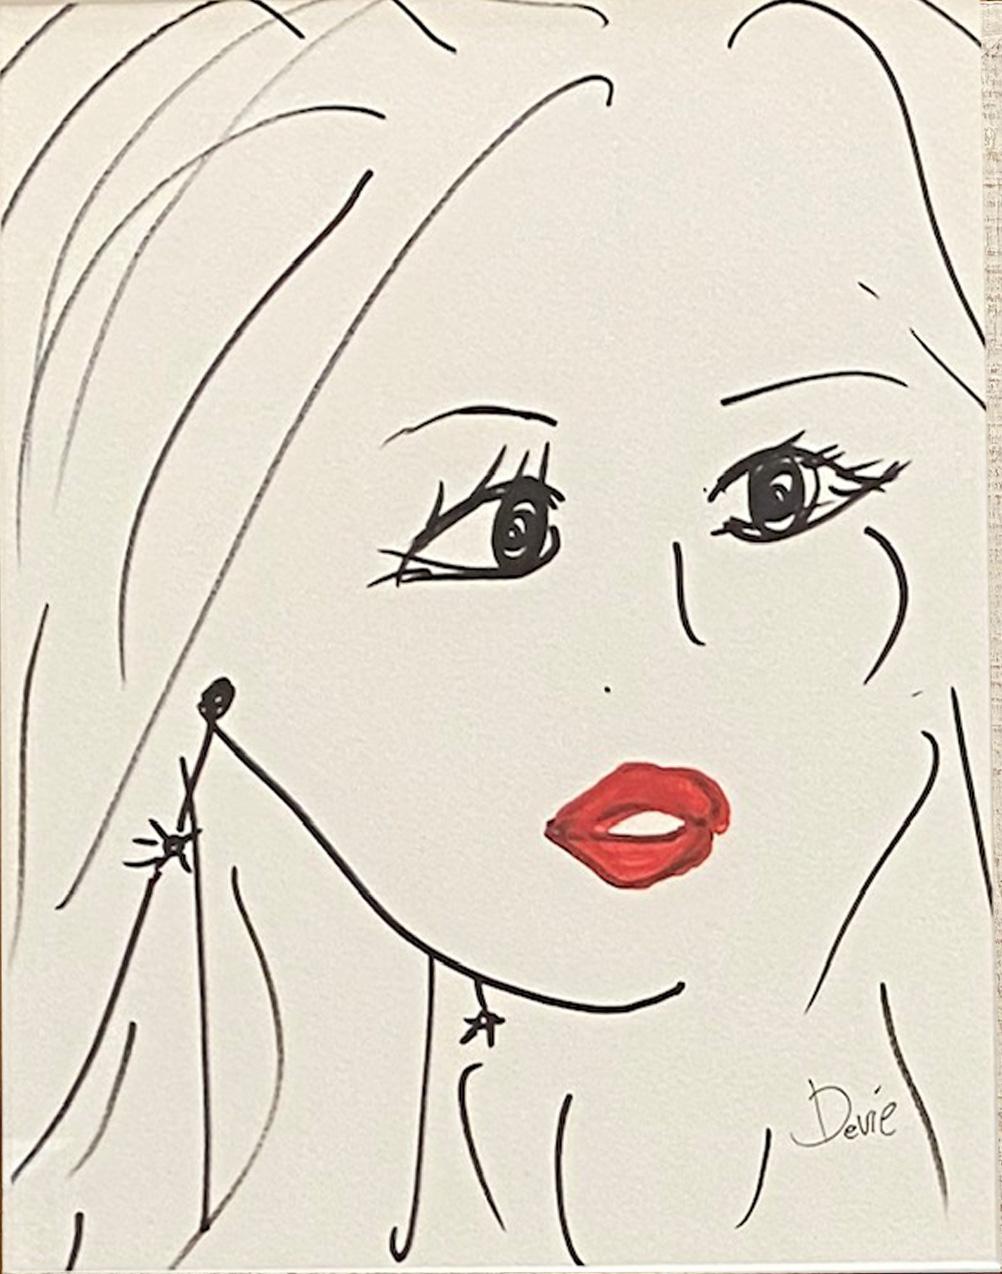 Devie Elzafon Portrait - 'A Woman With Red Lips' Pen and Ink & Acrylic on paper by Devie